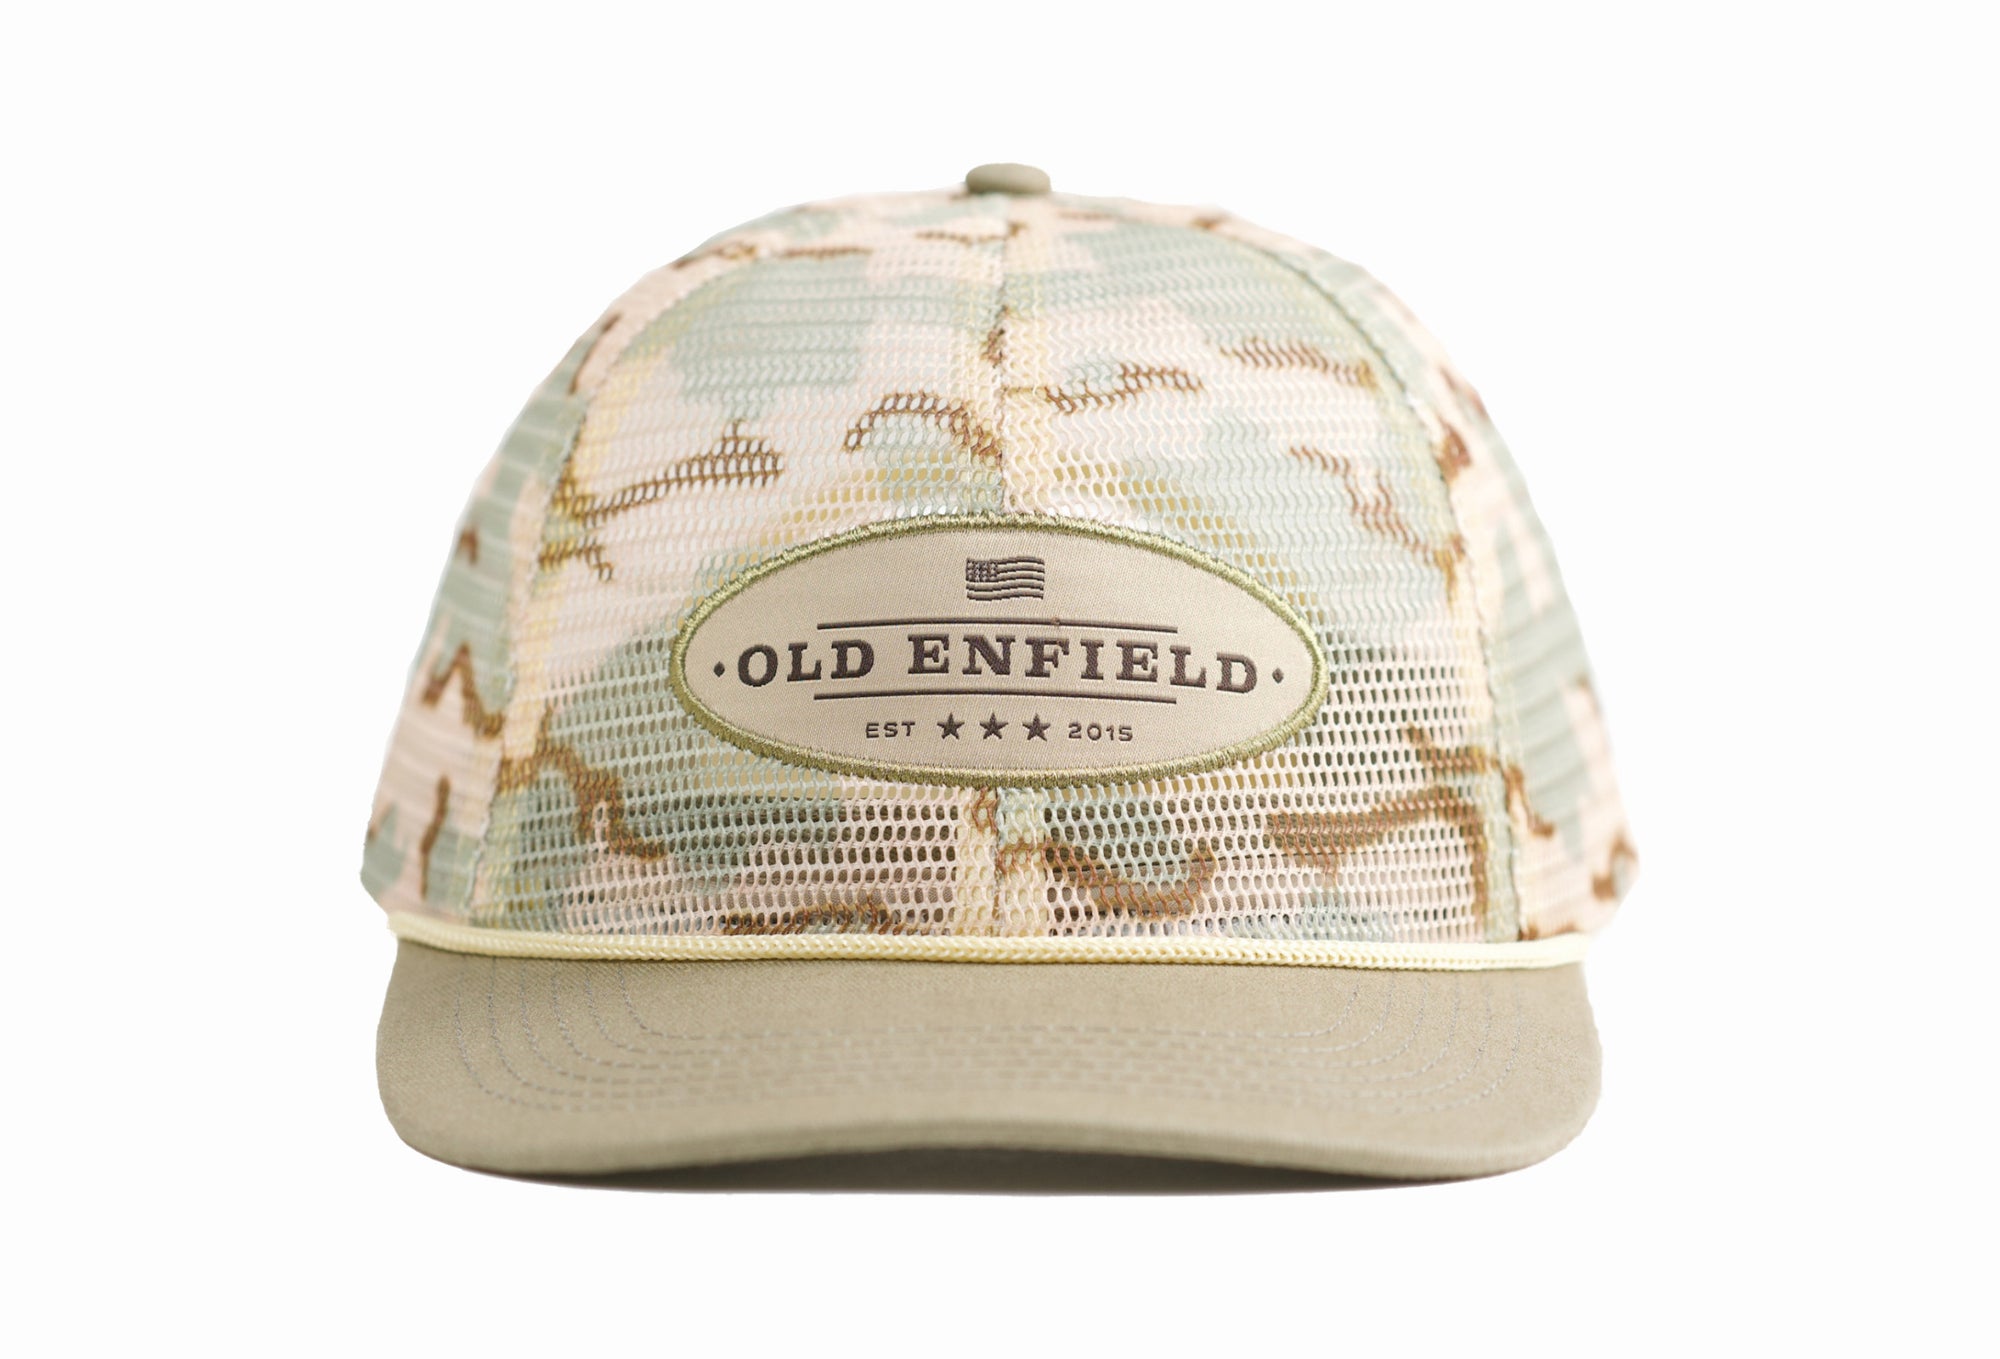 Classic Snapback Hat  Vintage Rope Fishing Hat, Hunting Cap - Old Enfield  Supply